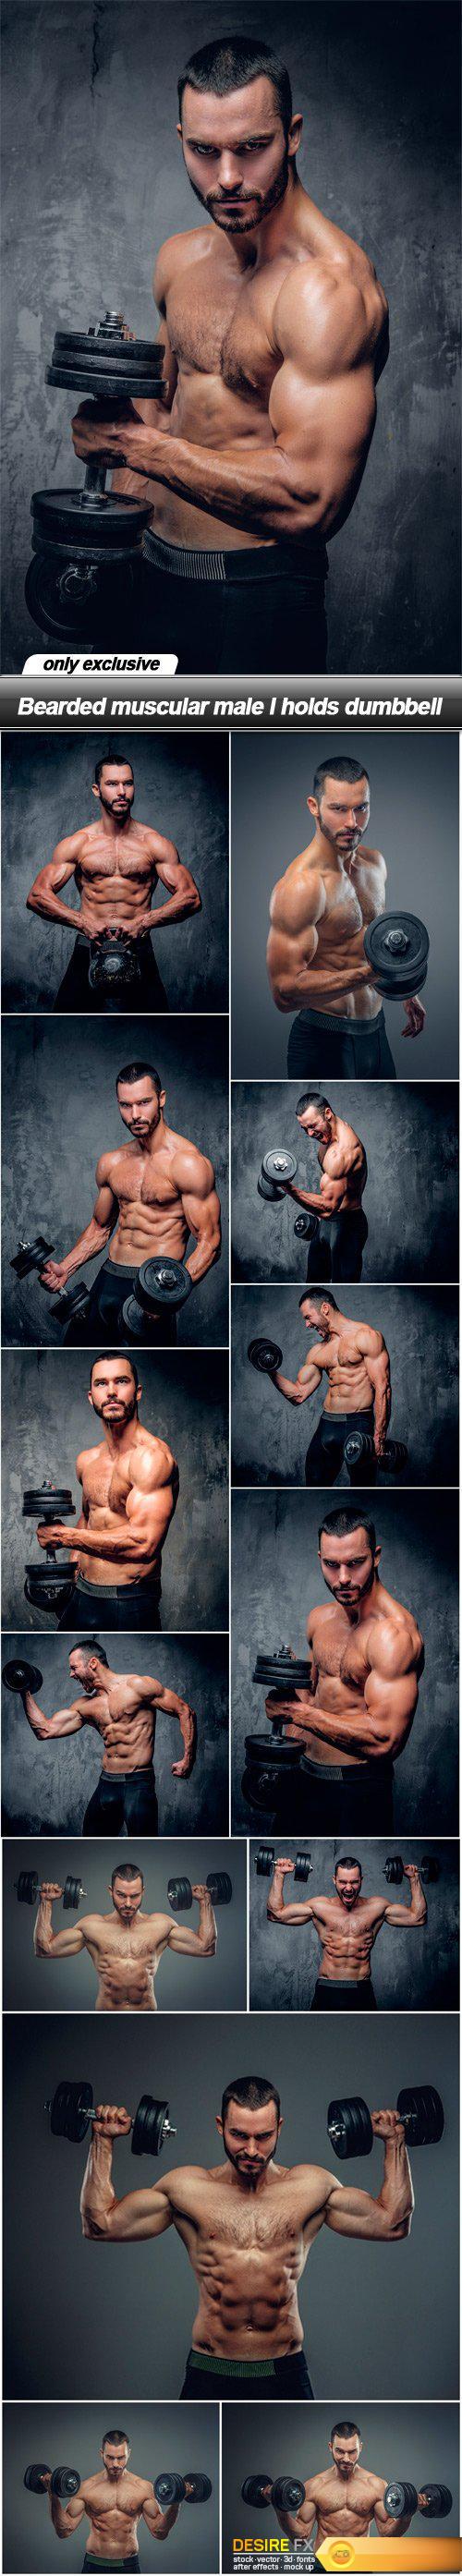 Bearded muscular male l holds dumbbell - 13 UHQ JPEG